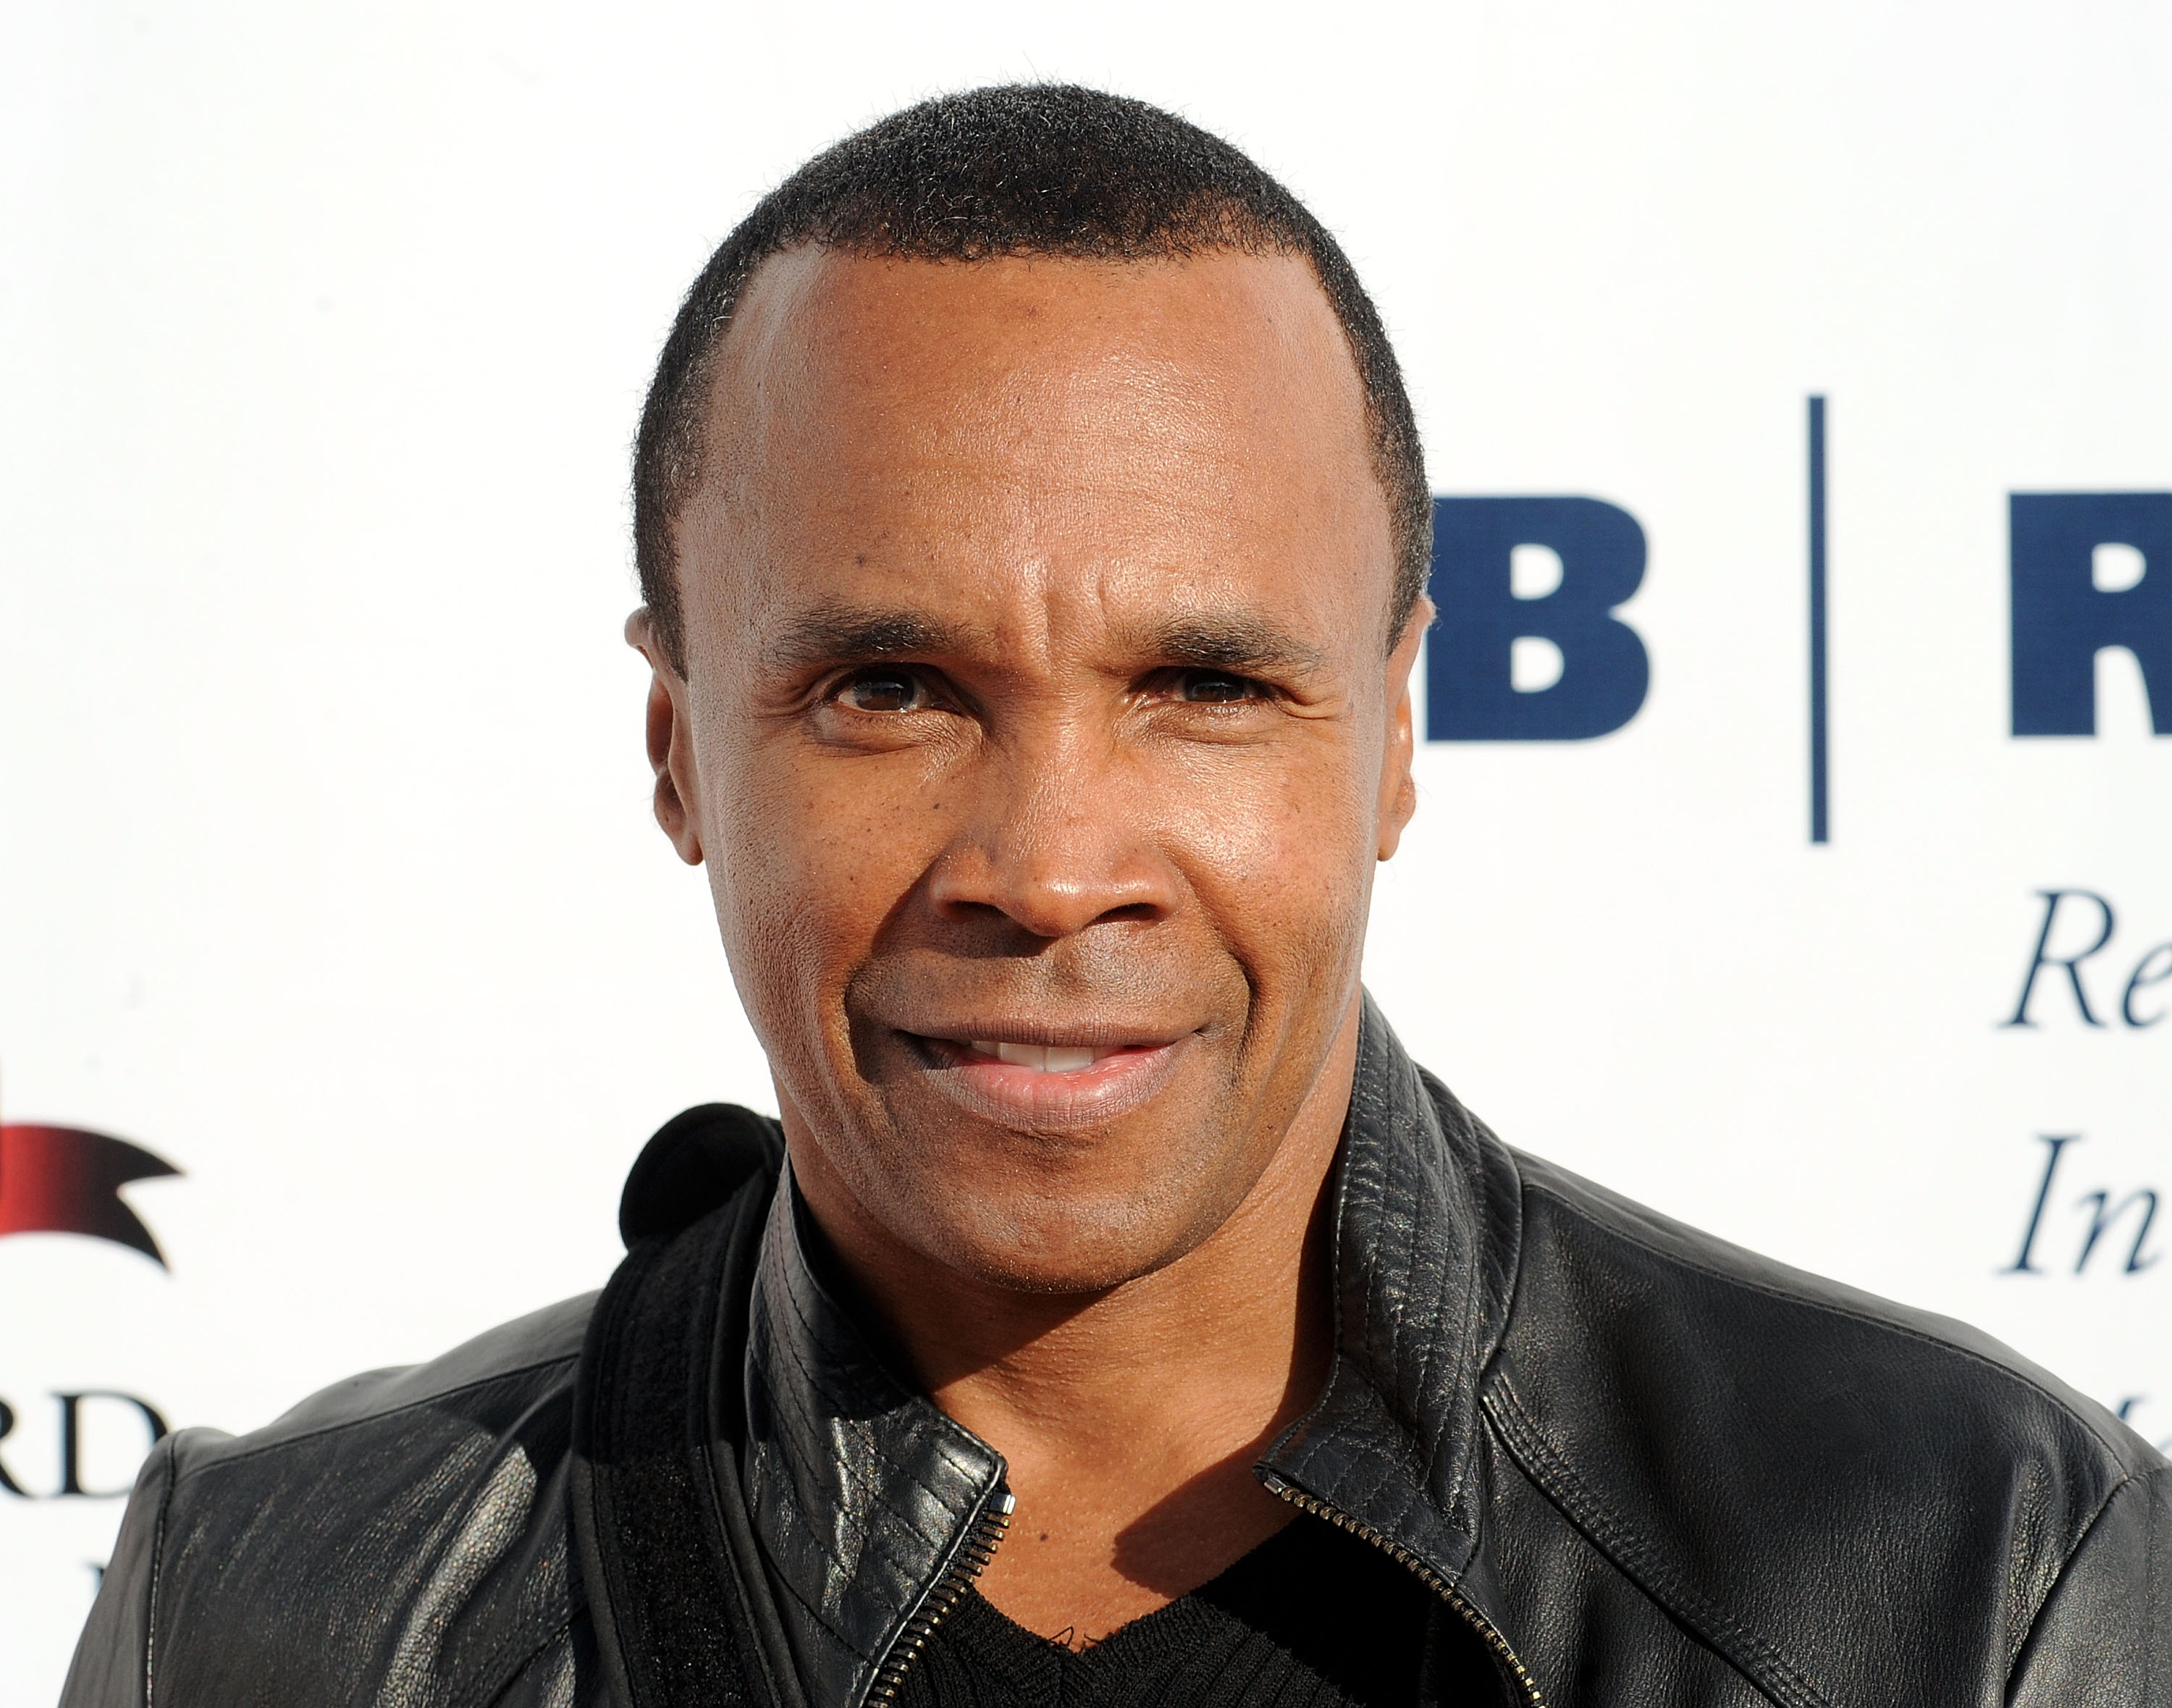 Sugar Ray Leonard Got To Keep His $1.5 Million Home in His Hostile Divorce With His 1st Wife